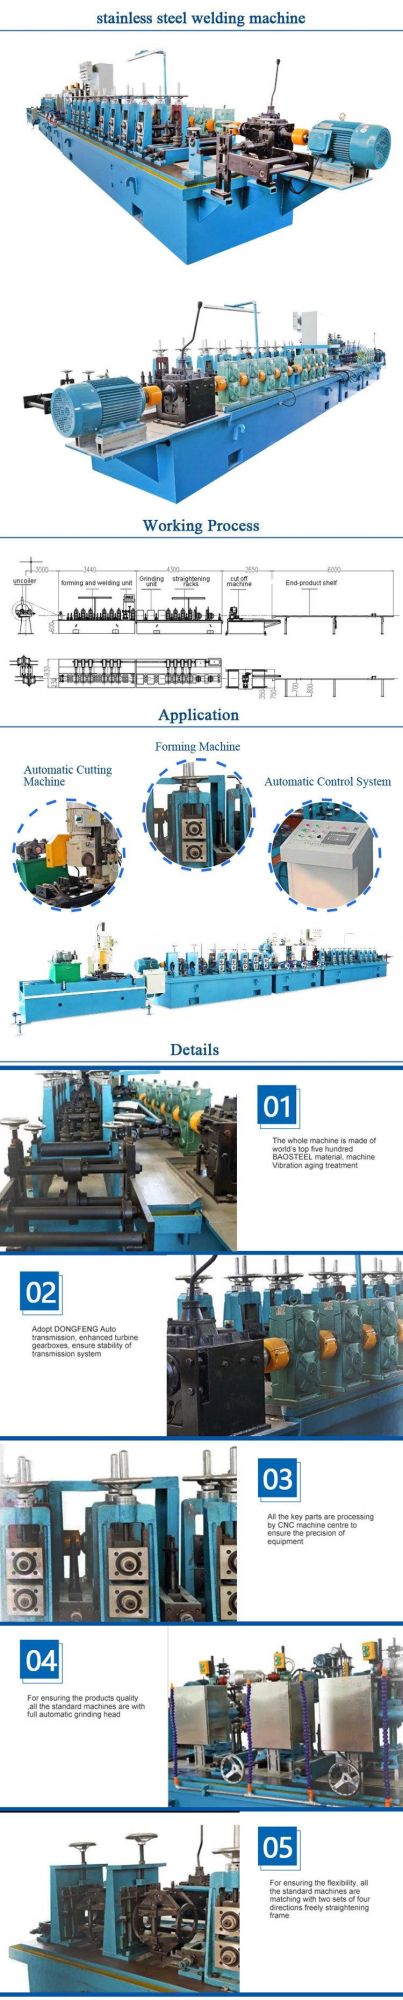 Hot Saw Stainless Steel Pipe Welding Production Line